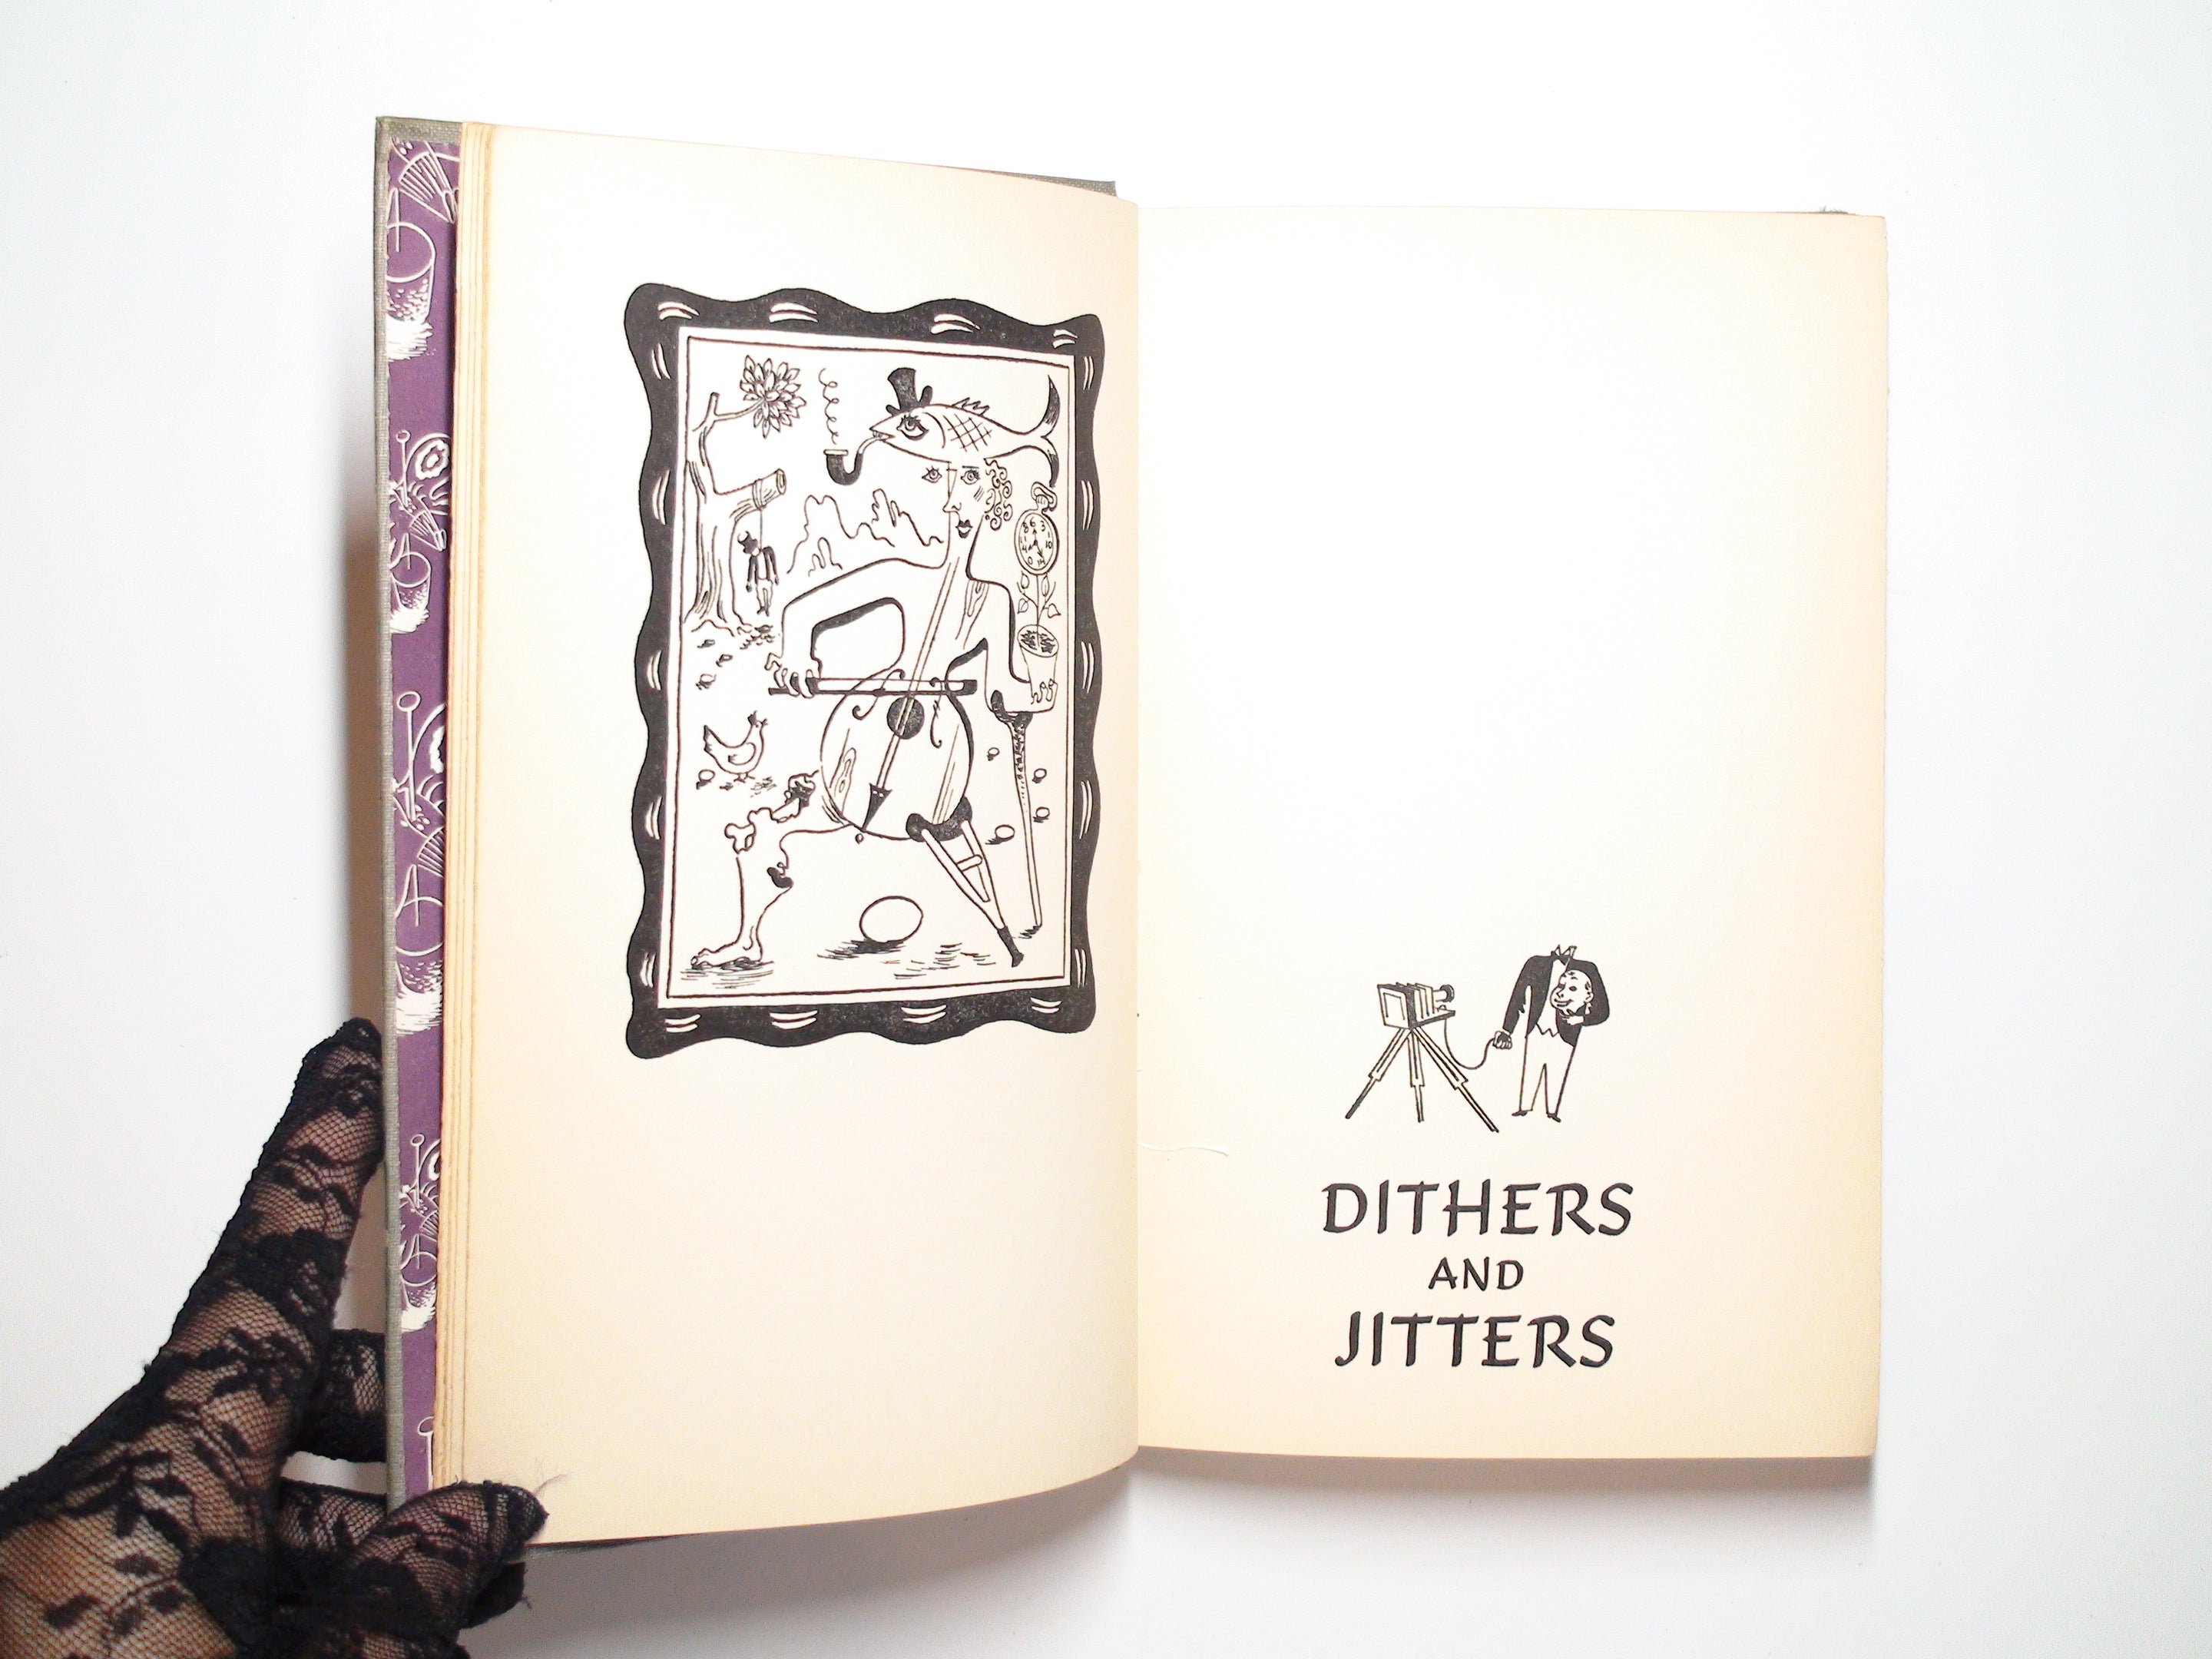 Dithers and Jitters by Cornelia Otis Skinner, Illustrated, 2nd Printing, 1938